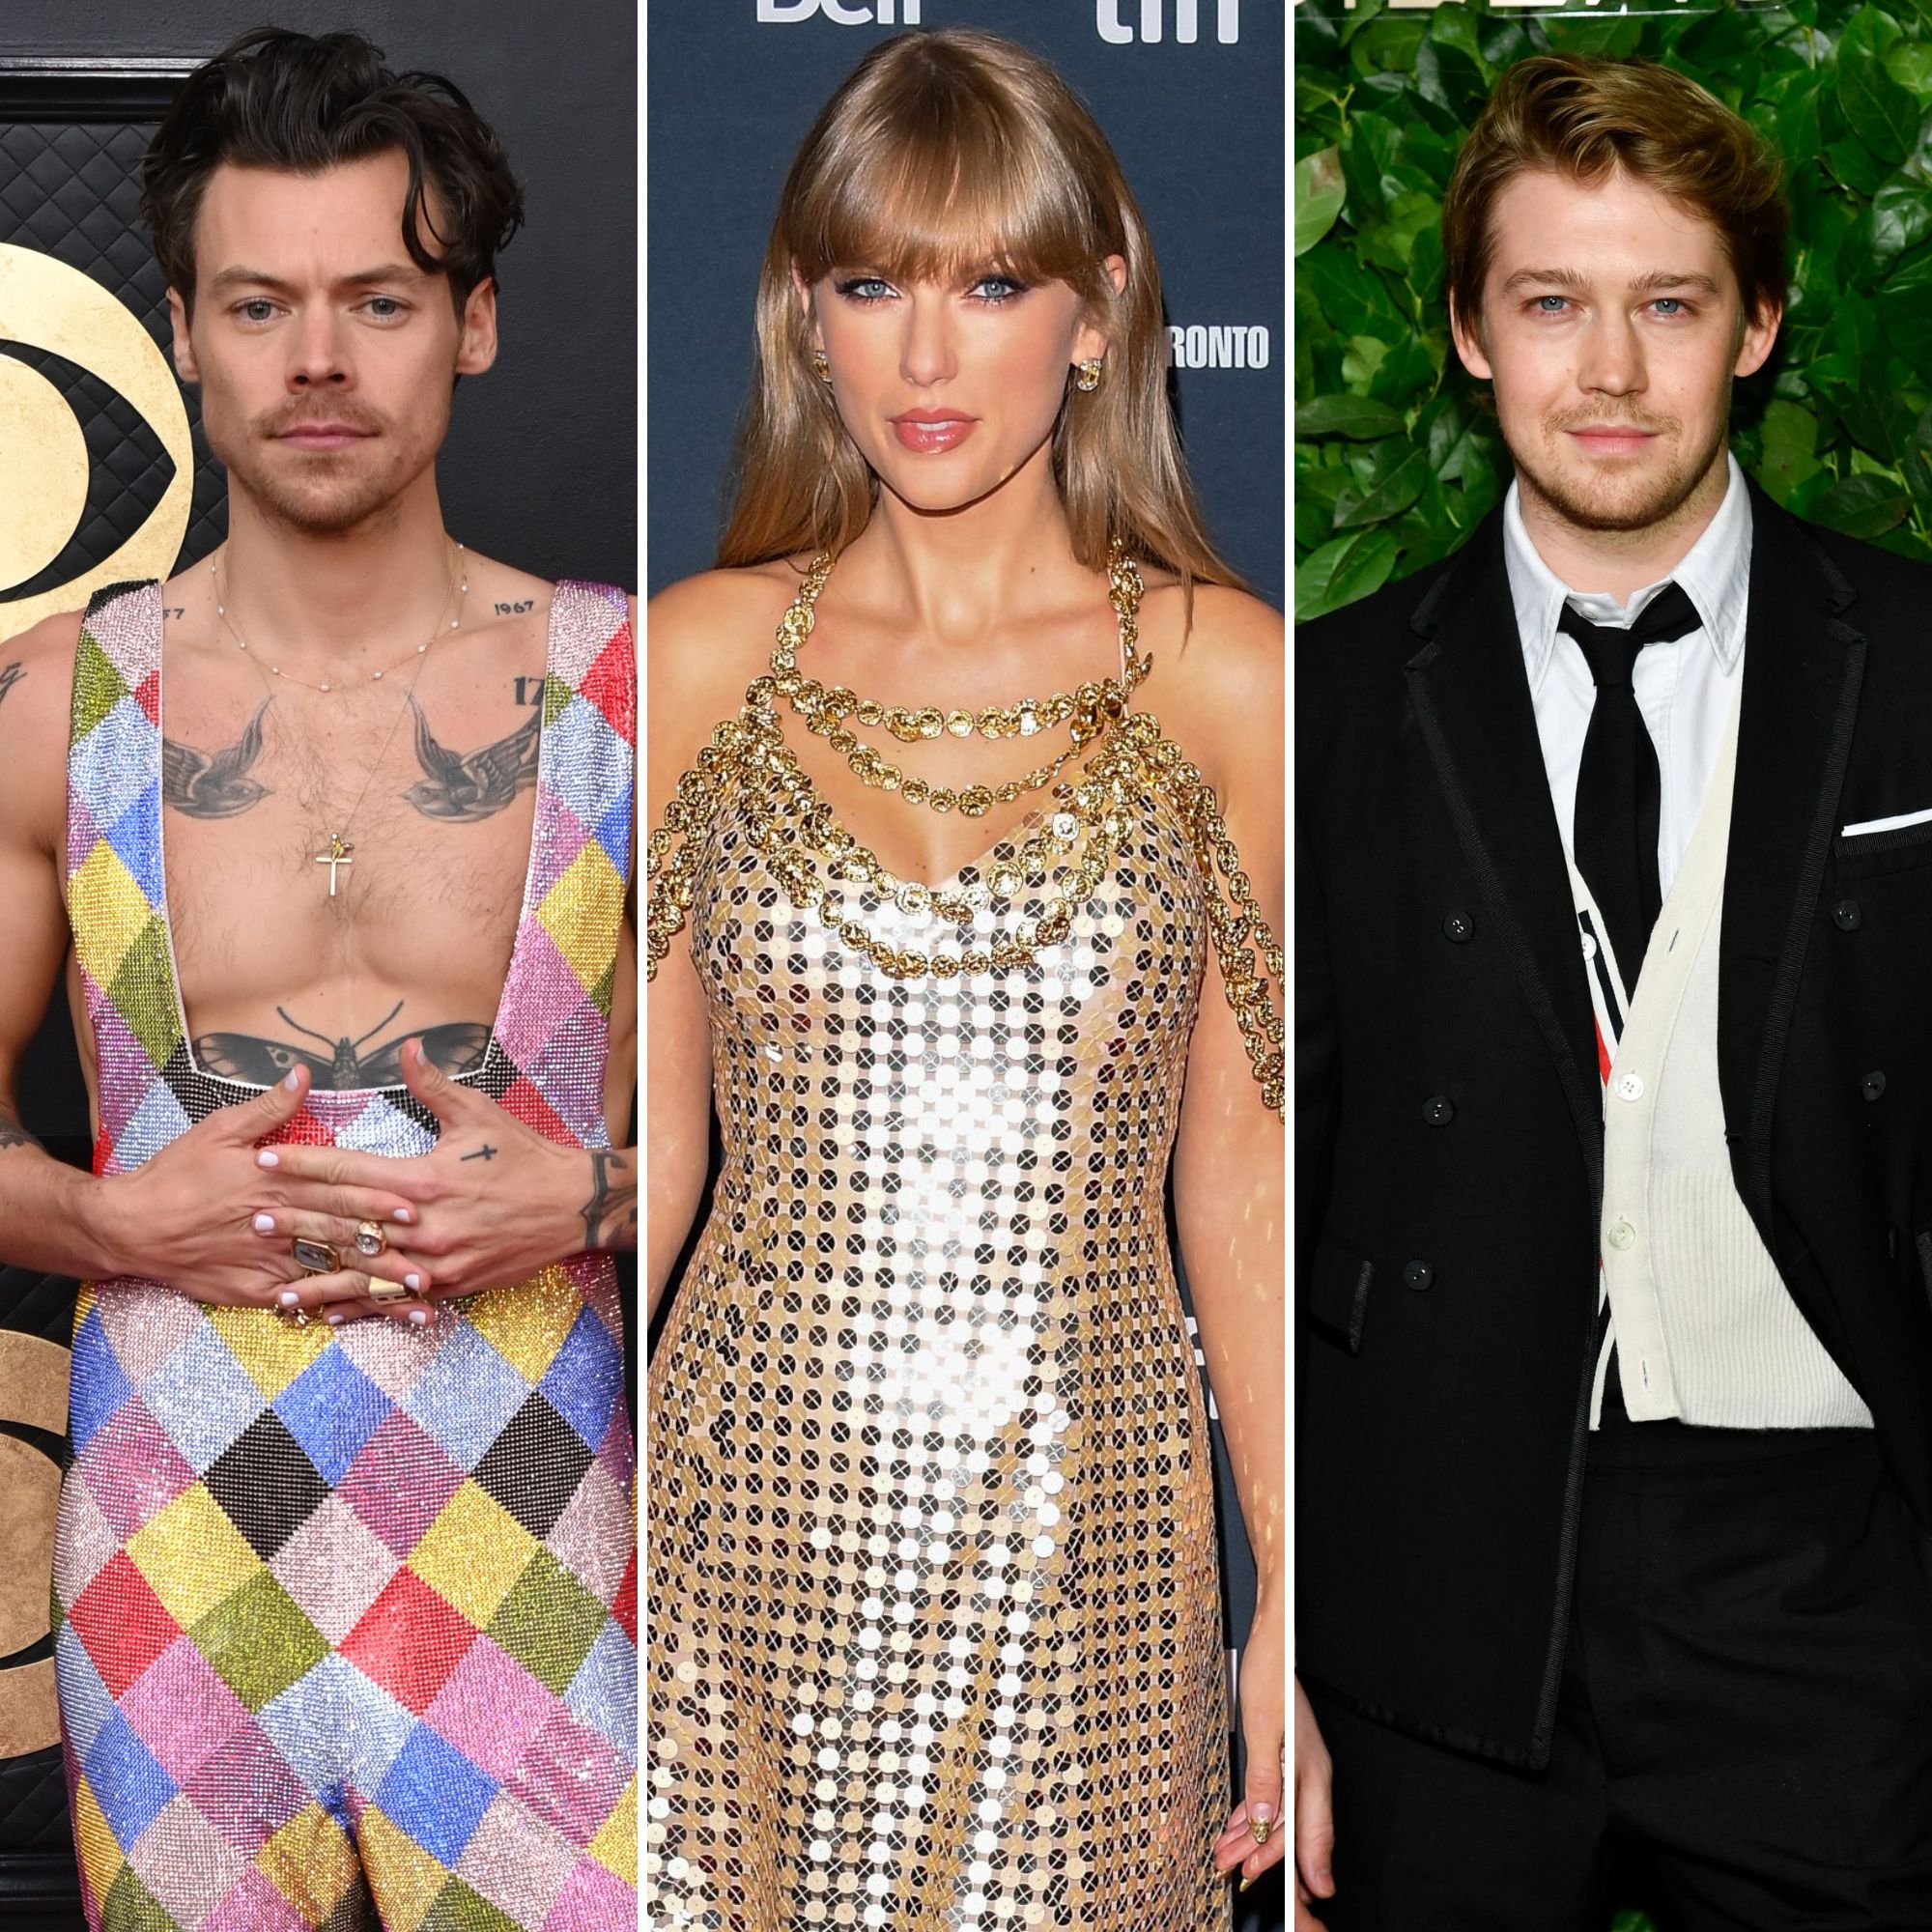 Who Is Taylor Swift Dating?